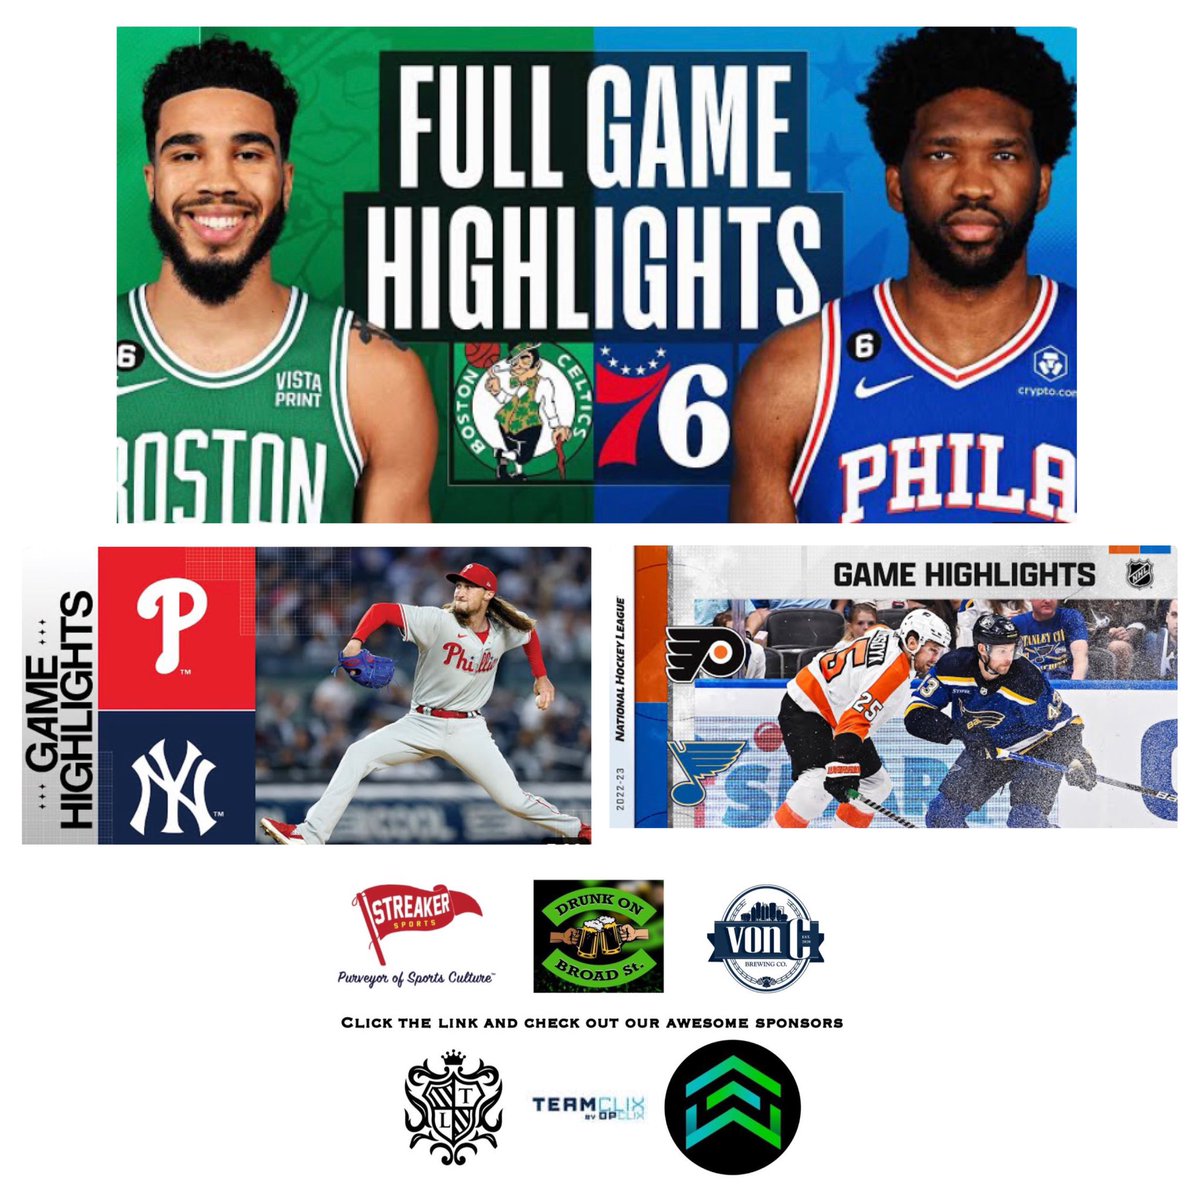 @phillies beat the @Yankees 4-1 #RingTheBell
Highlights➡️ youtu.be/5EEkhD4nsTU

@philadelphiaflyers lost to the @StLouisBlues 4-2 #FueledByPhilly 
Highlights➡️ youtu.be/QnUOhbFOU2Q

@sixers beat the @celtics 103-101 #BrotherlyLove
Highlights➡️ youtu.be/hU6Gz43e-4g